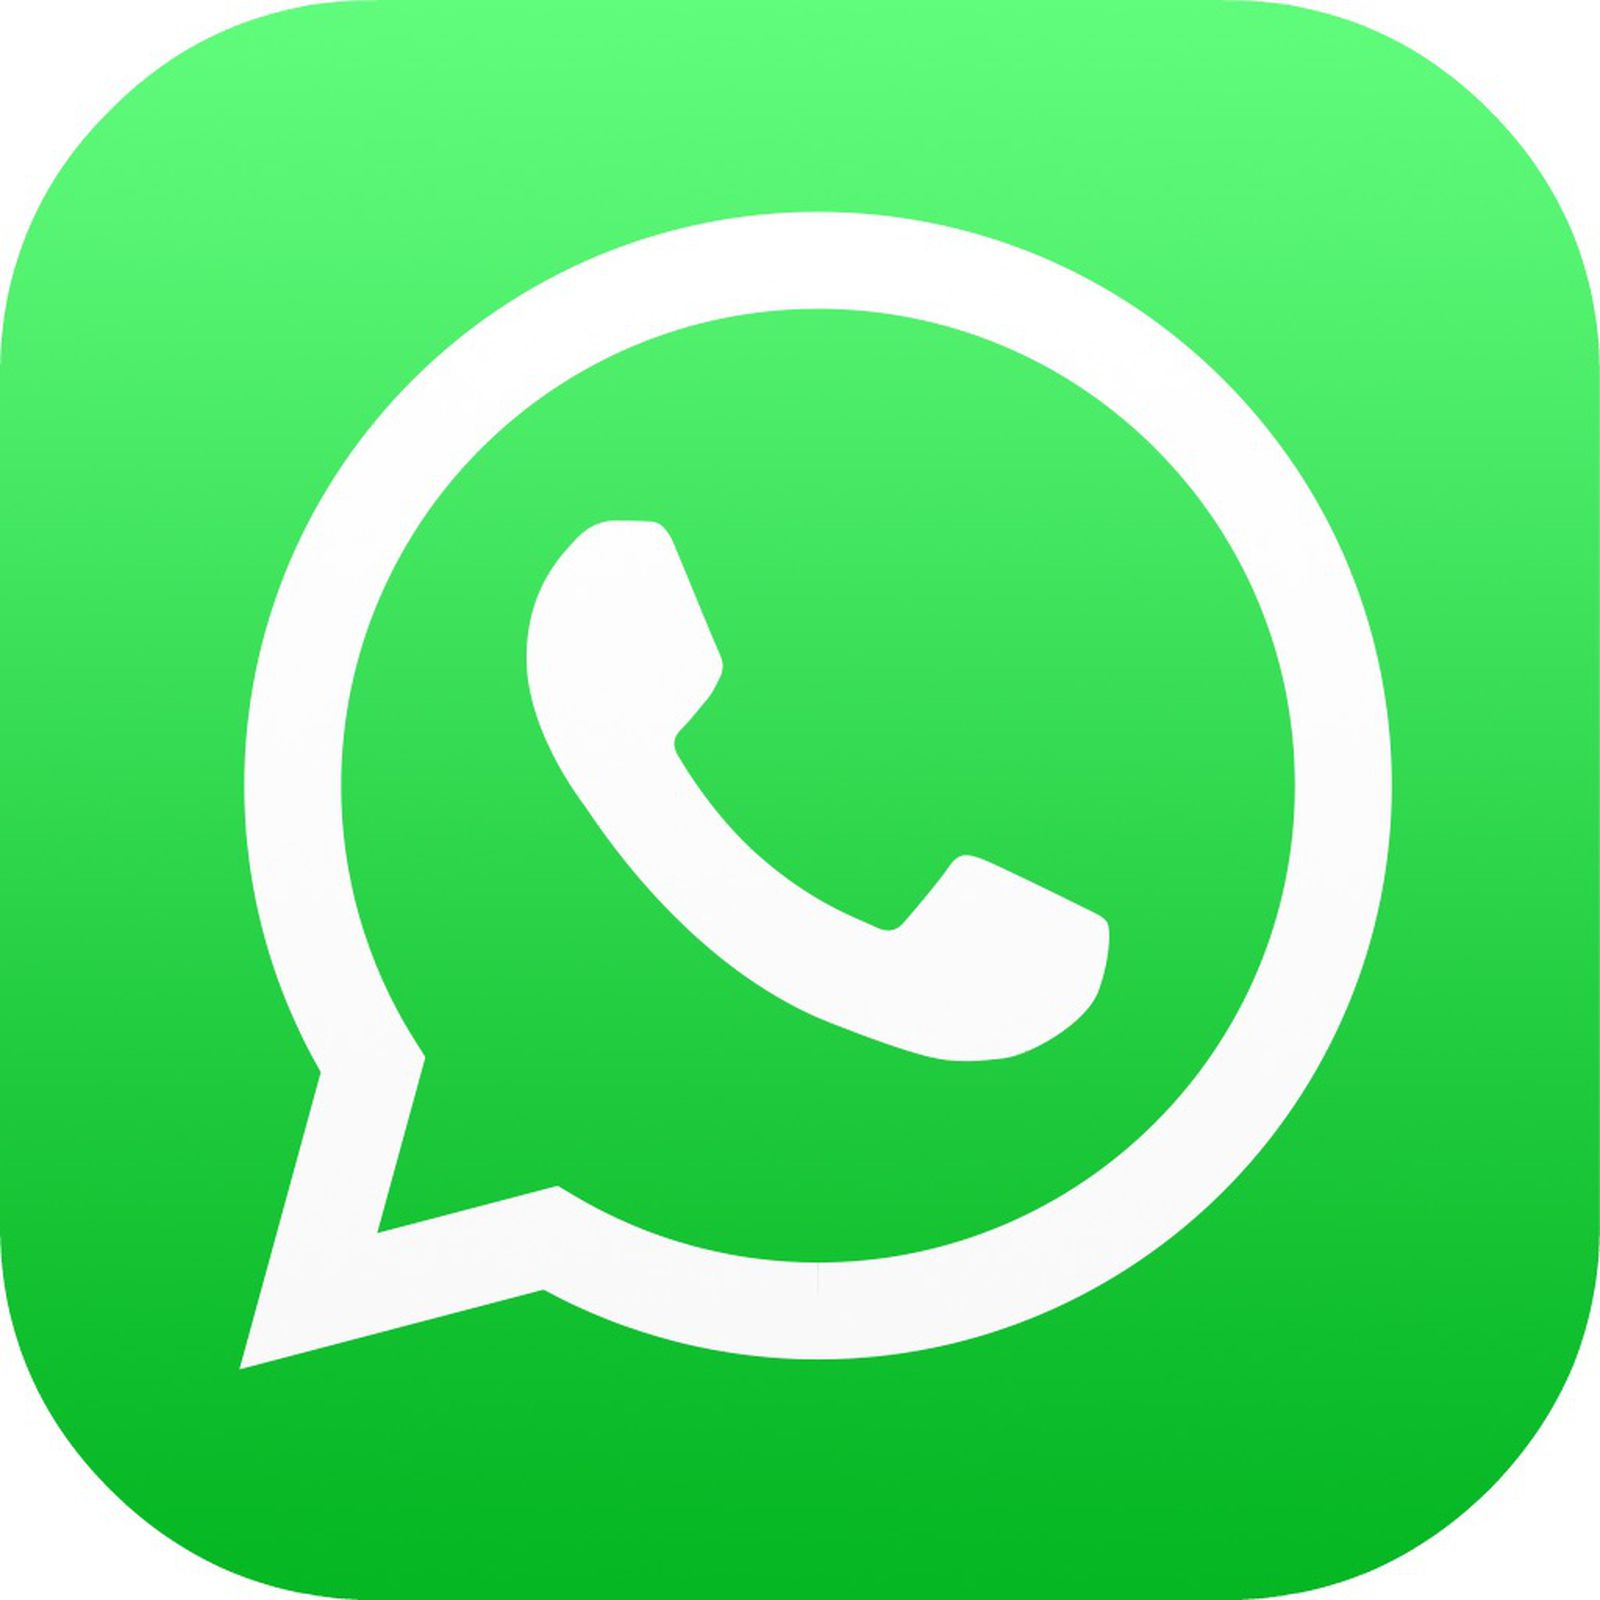 The mandatory update of the WhatsApp Privacy Policy allows user data to be shared with Facebook